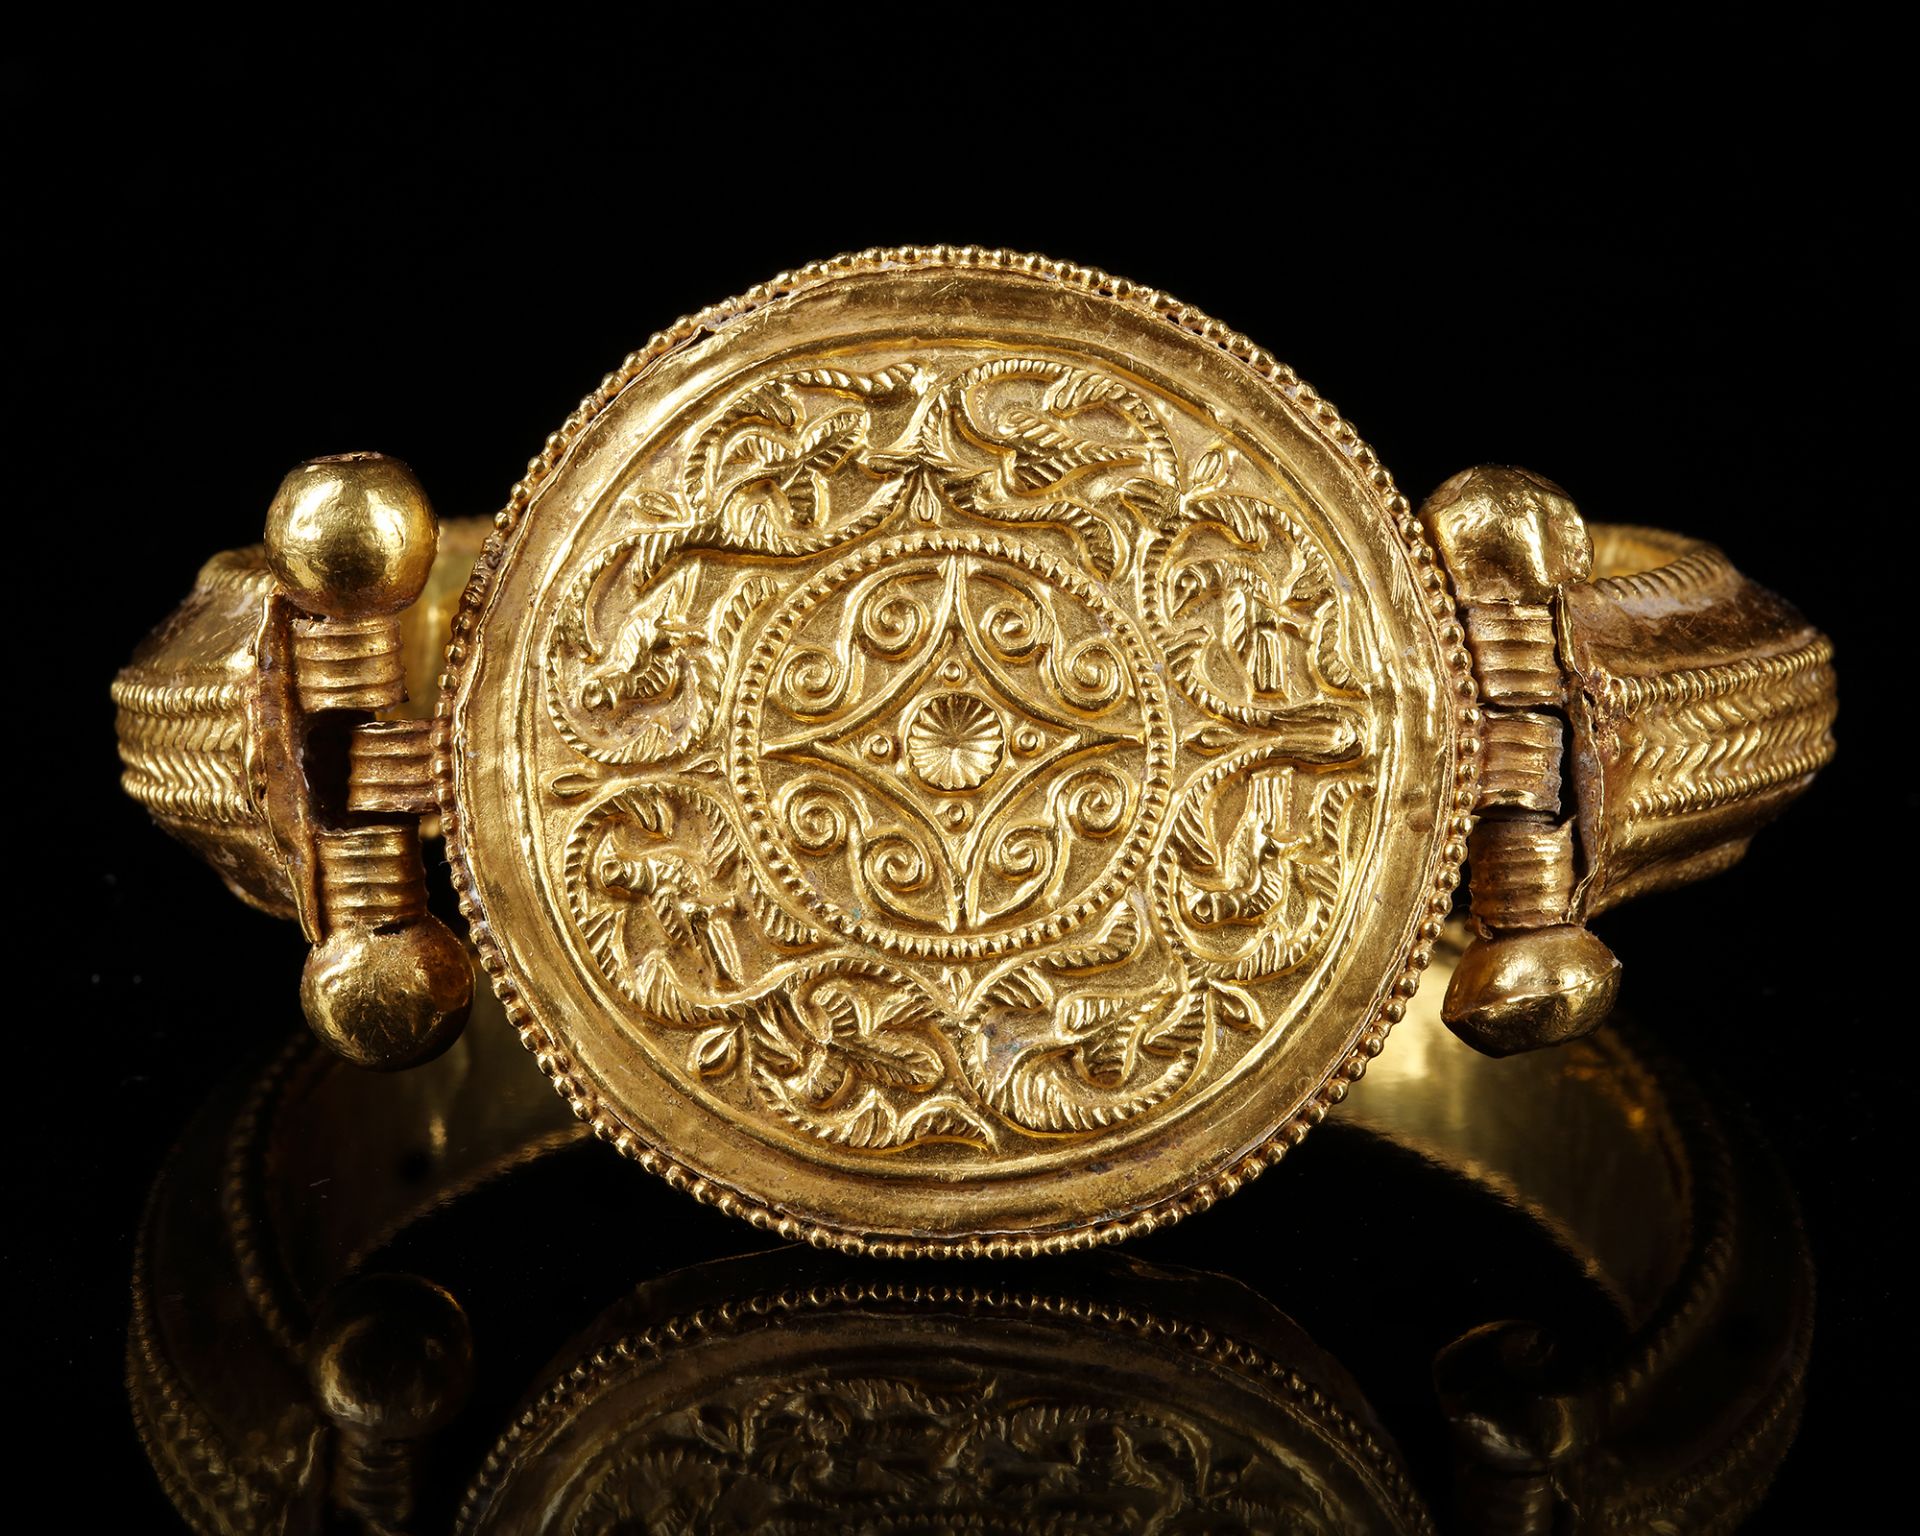 A RARE PAIR OF A FATIMID GOLD BRACELETS, POSSIBLY SYRIA, 11TH CENTURY - Image 10 of 14